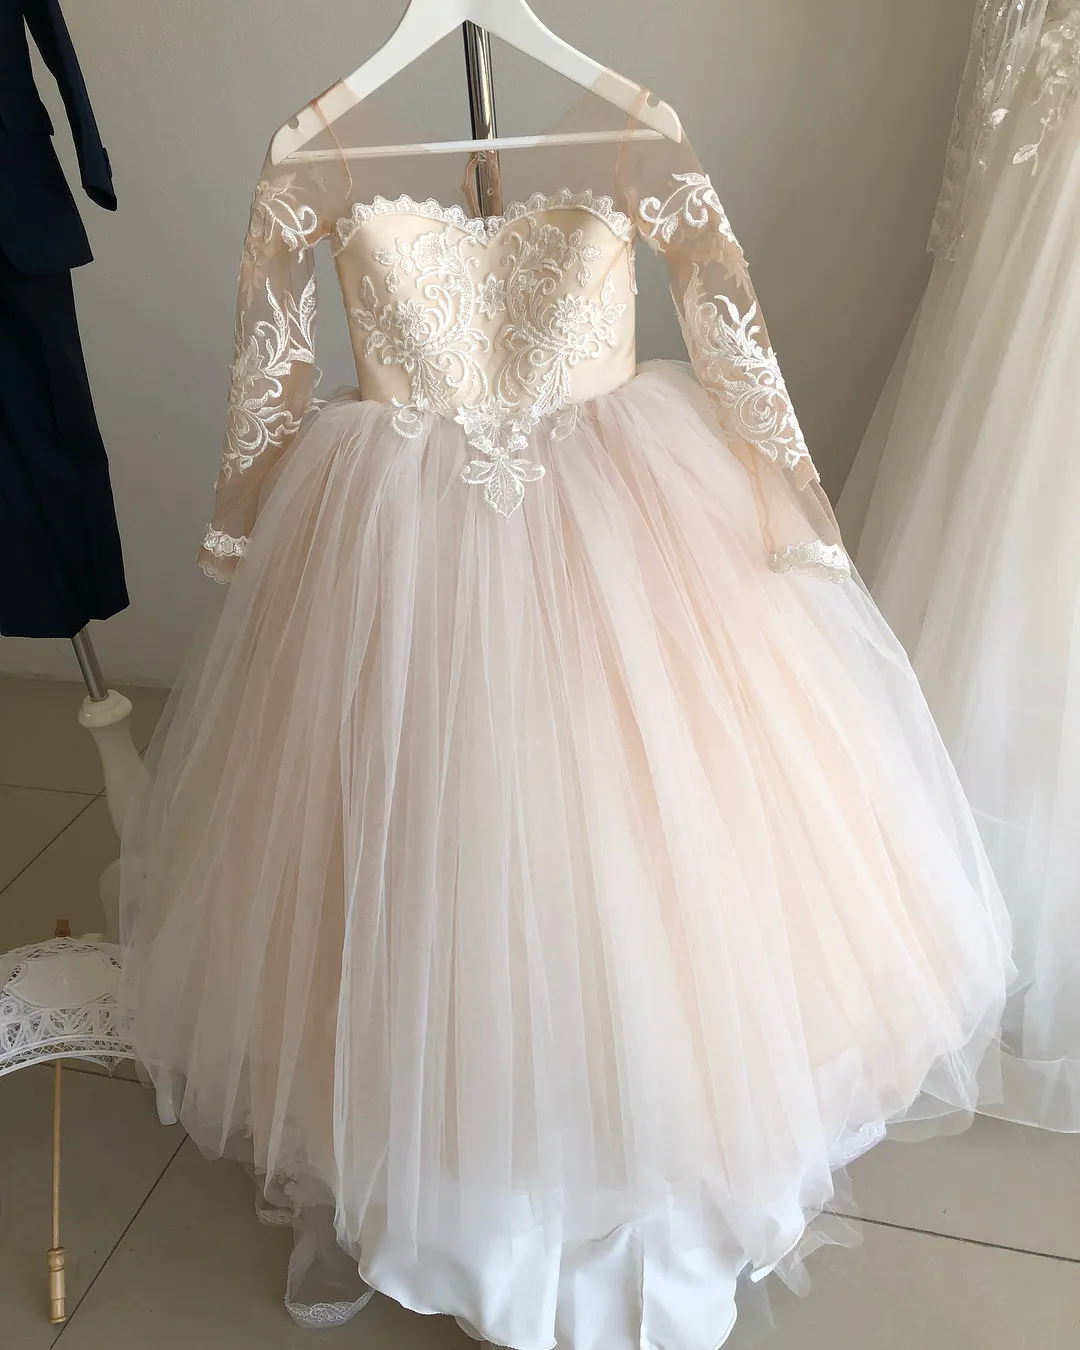 Lace Flower Girl Dress Bows Children's First Communion Dress Princess Tulle Ball Gown Wedding Party Gowns